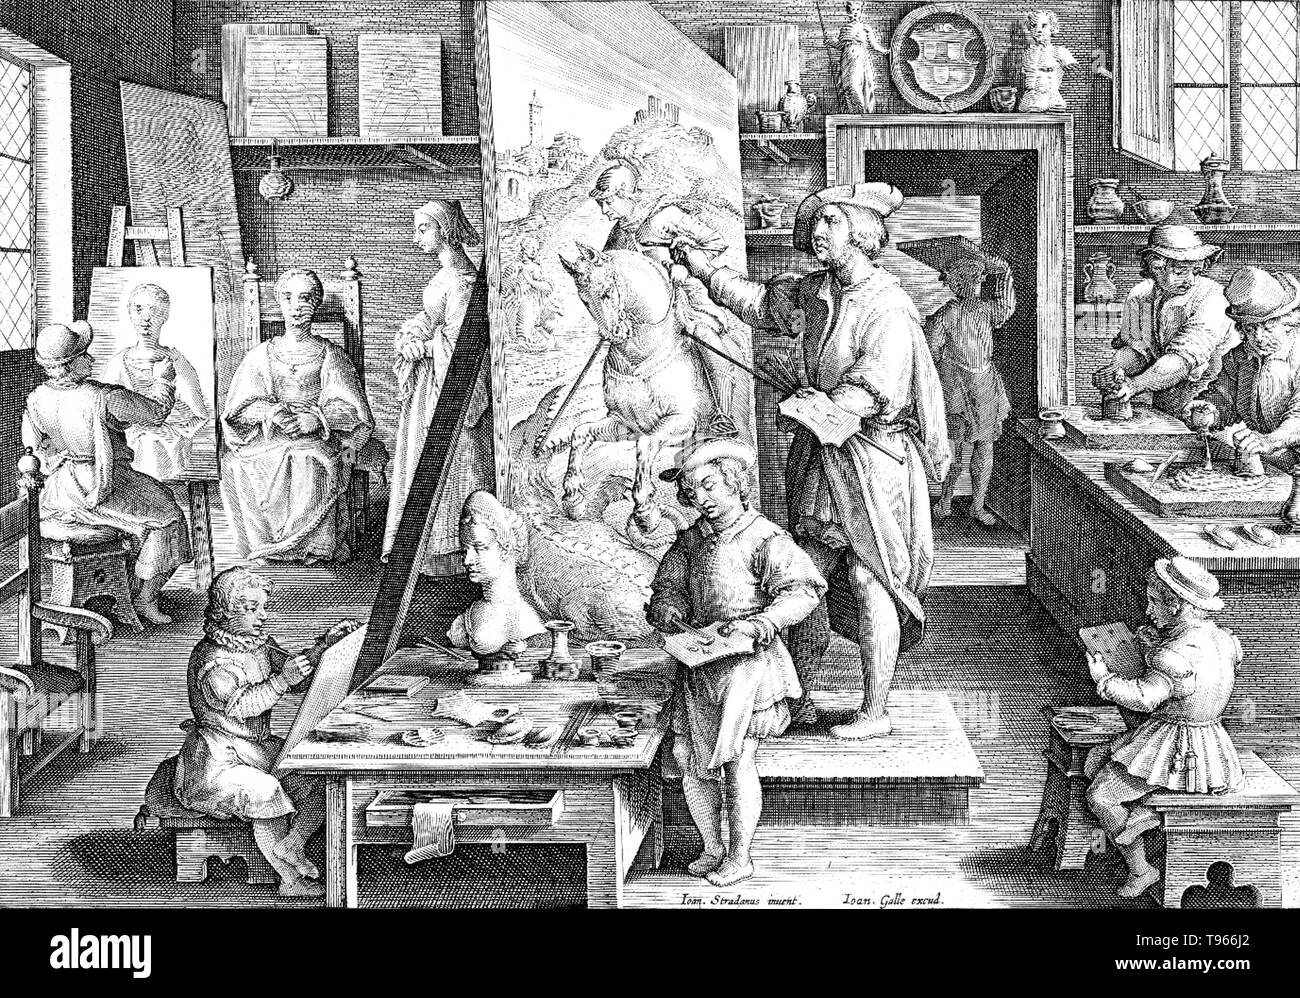 PLATE 14. The Invention of Oil Painting. Fourteenth plate from a print series entitled Nova Reperta (New Inventions of Modern Times) consisting of a title page and 19 plates, engraved by Jan Collaert I, after Jan van der Straet, called Stradanus, and published by Philips Galle. Illustration of a painter's workshop. Stock Photo